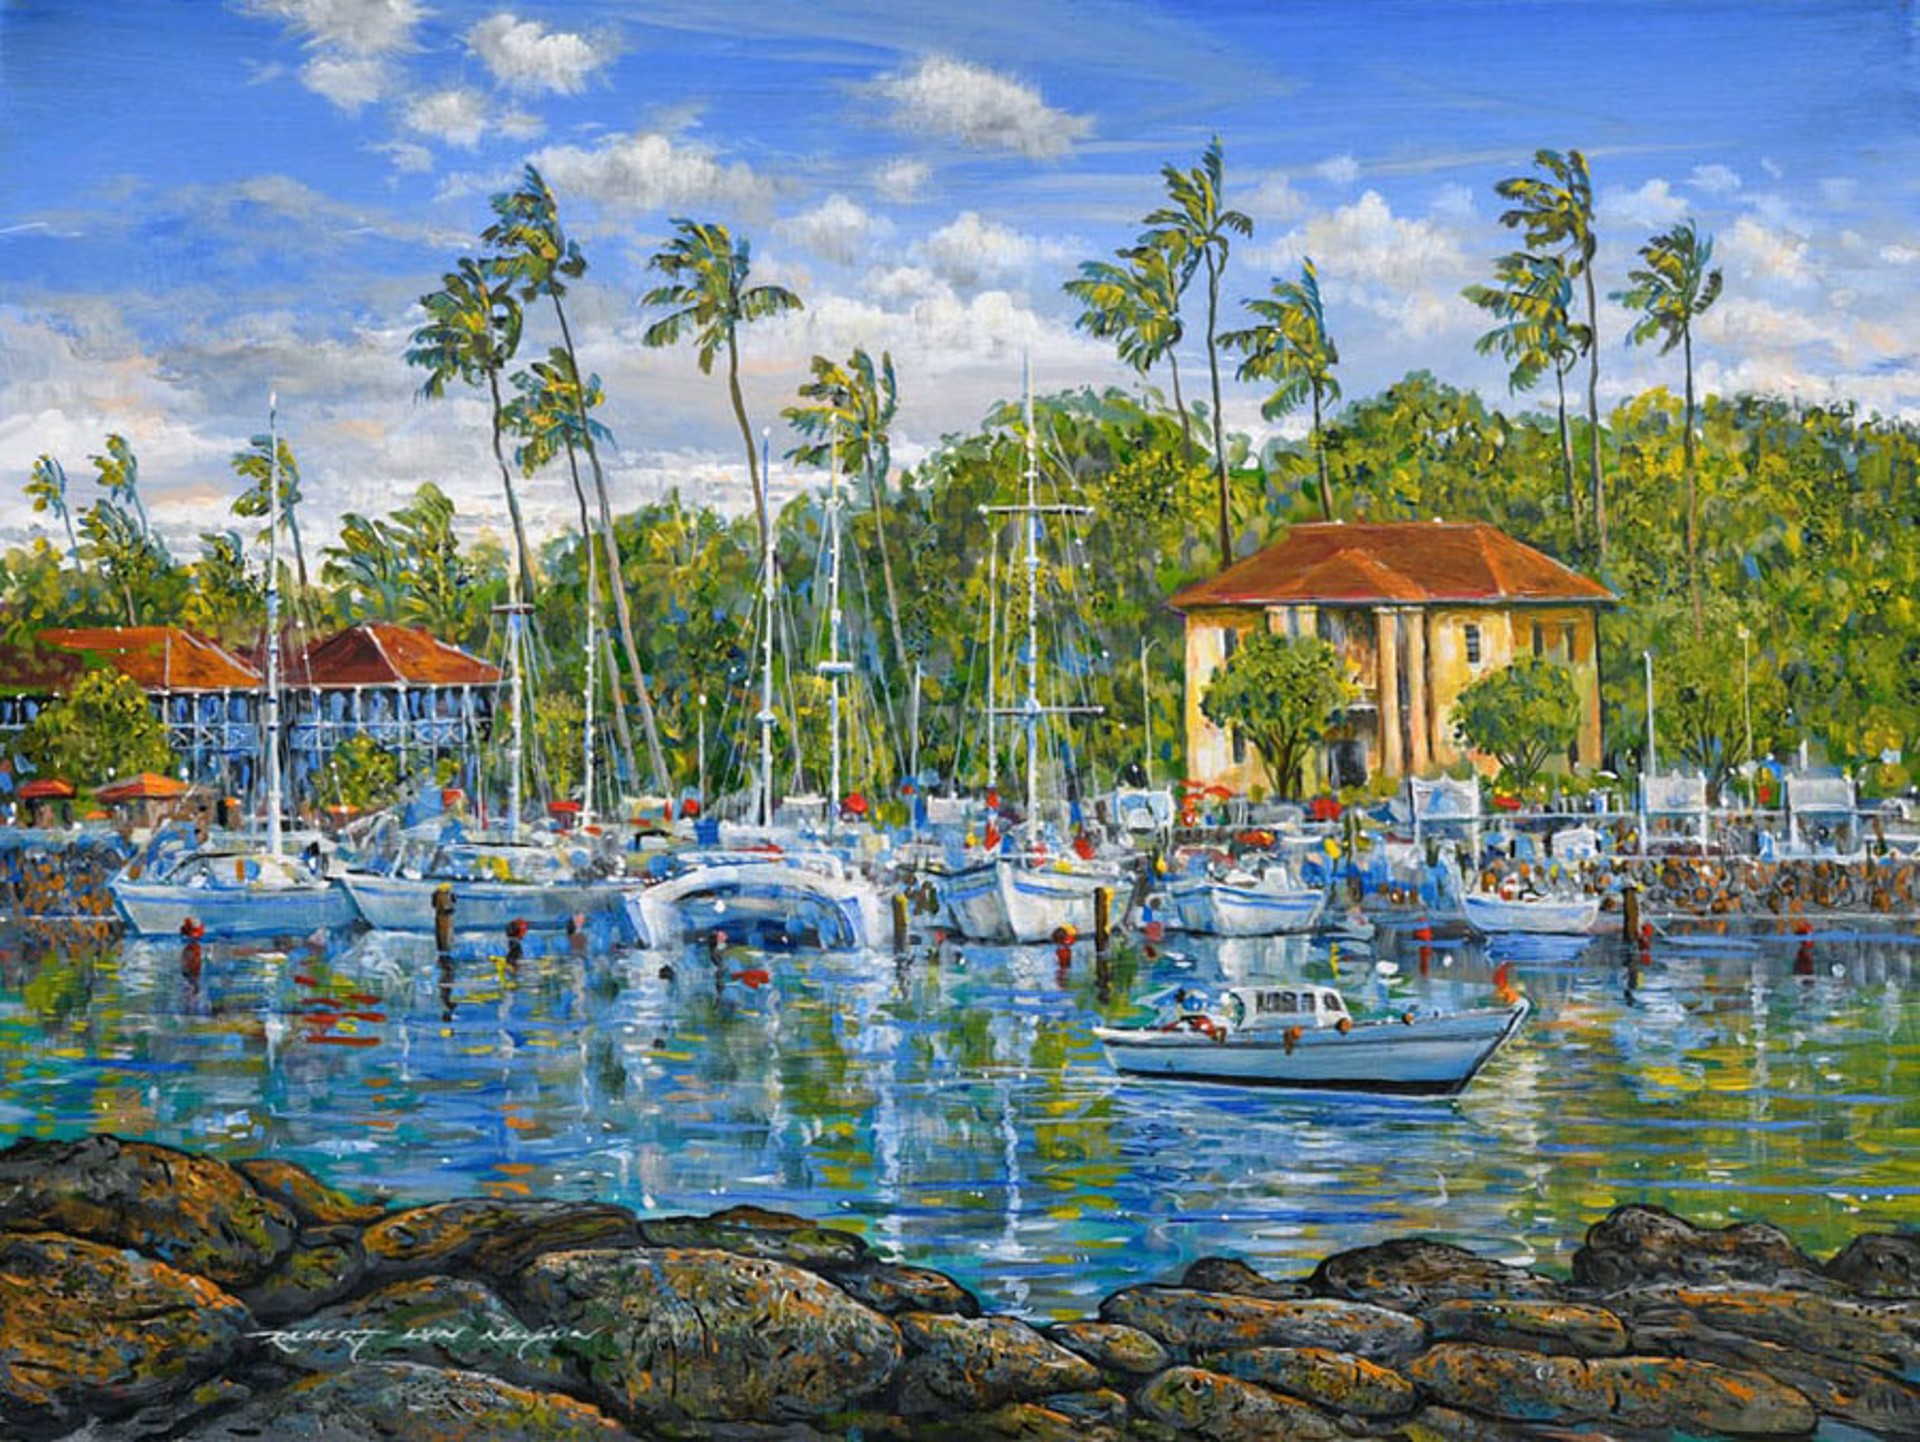 Thoughts Of Lahaina by Robert Lyn Nelson